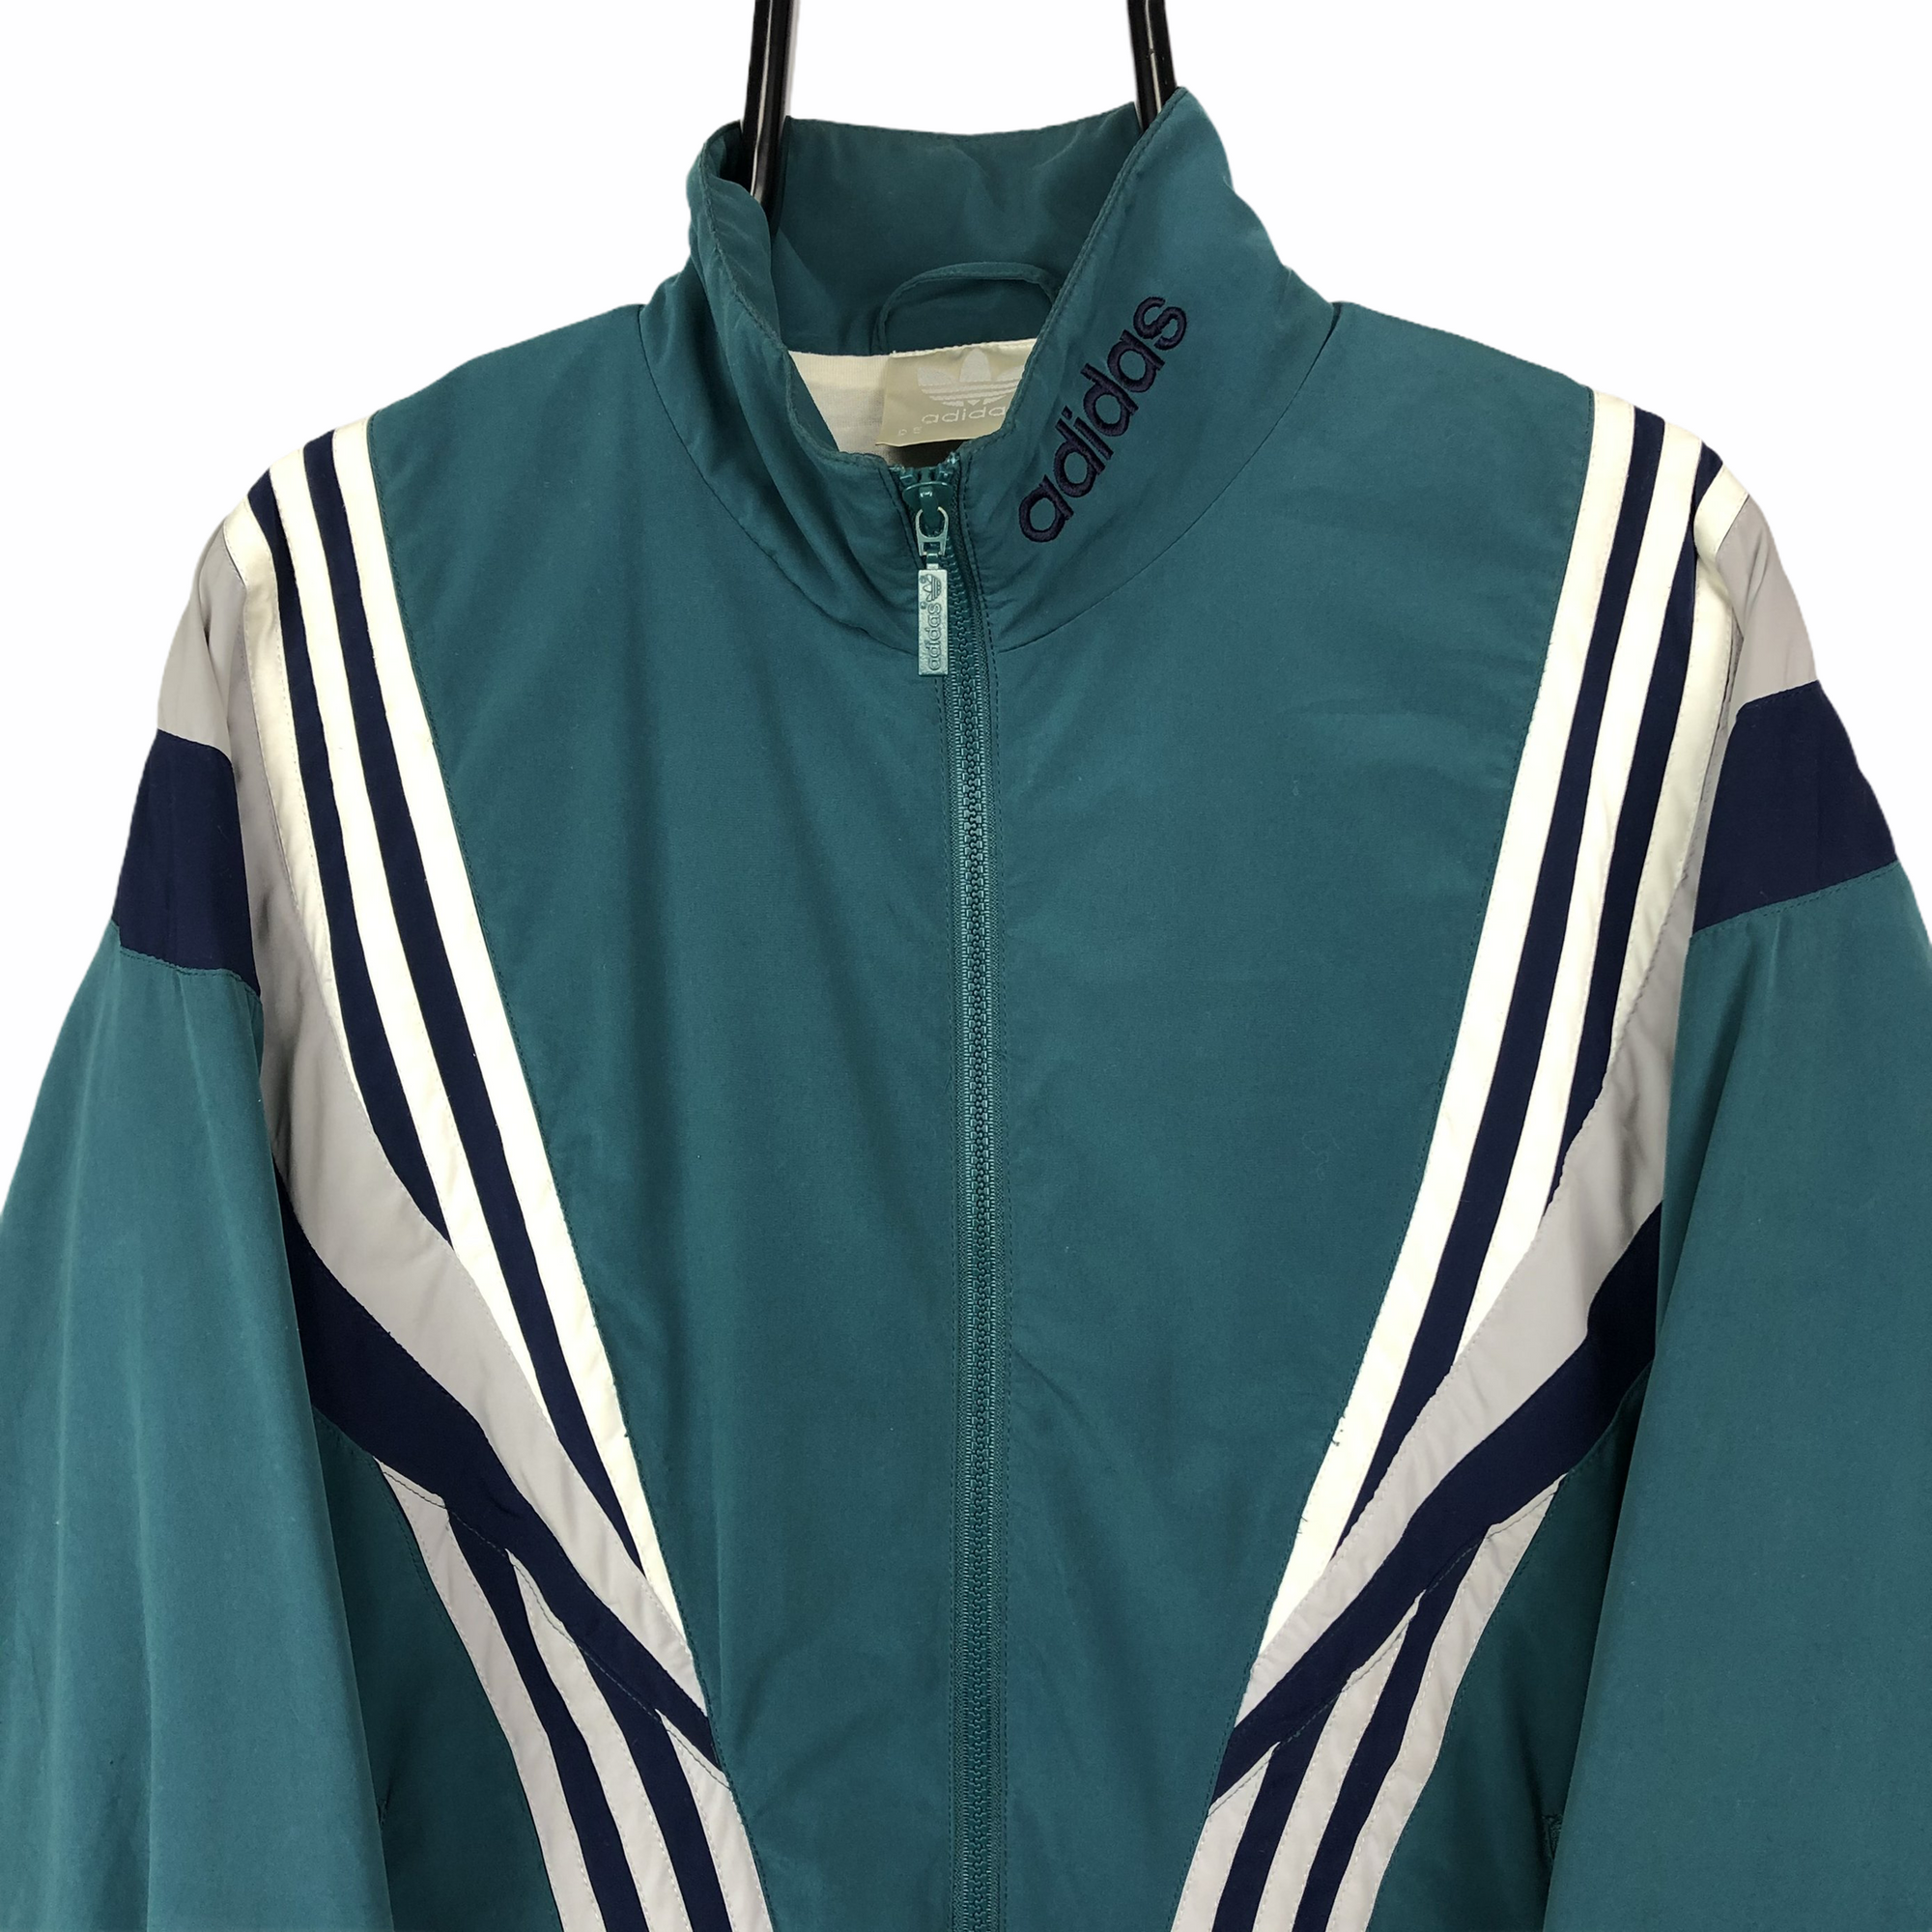 Vintage 90s Adidas Track Jacket in Green, Navy & White - Men's Large/Women's XL